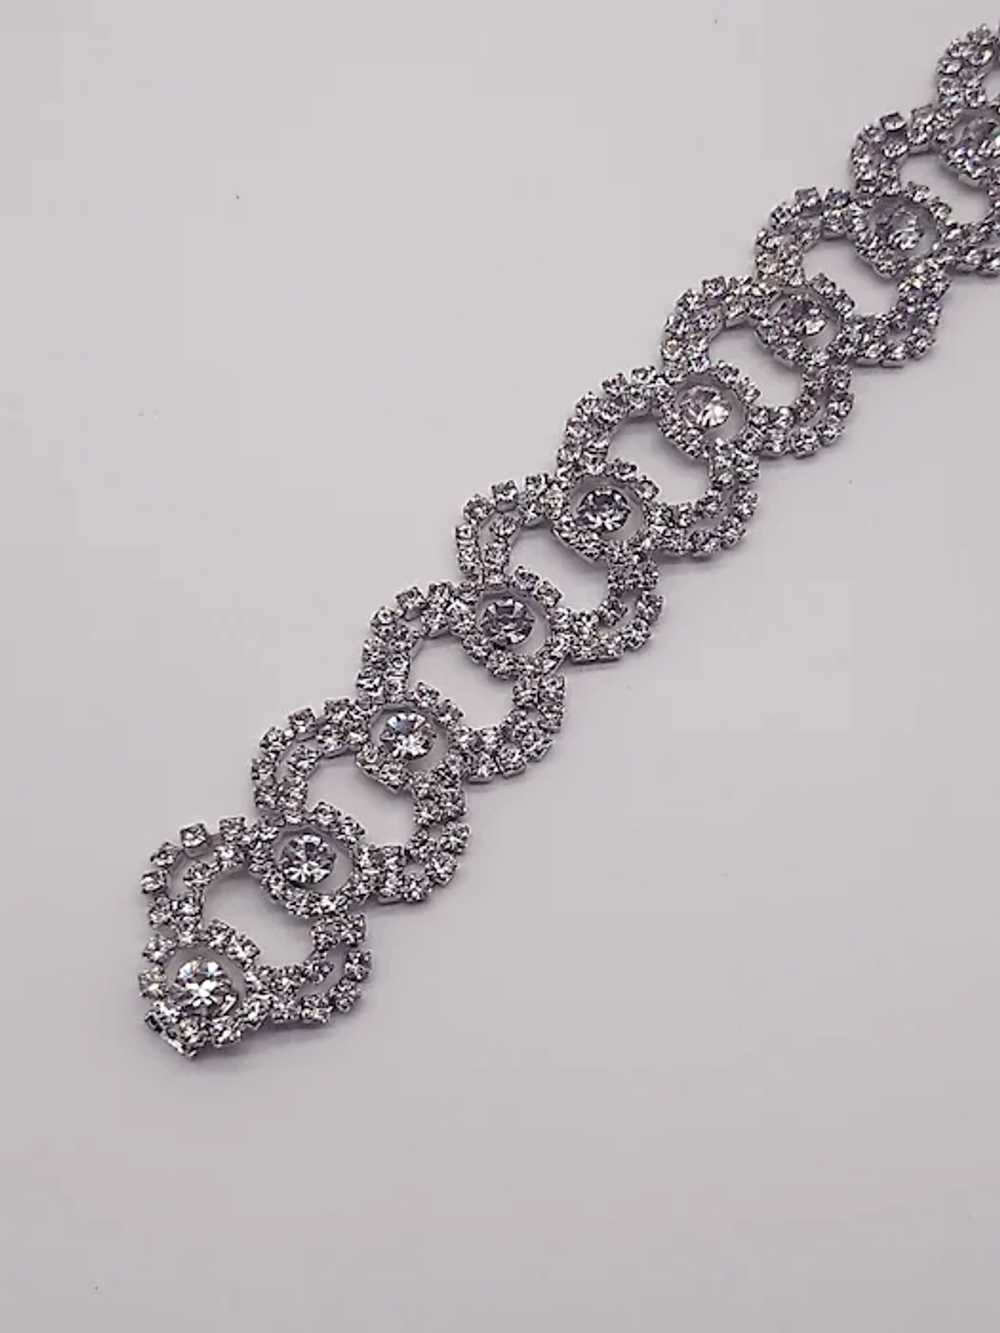 Vintage clear silver tone chocker necklace - image 8